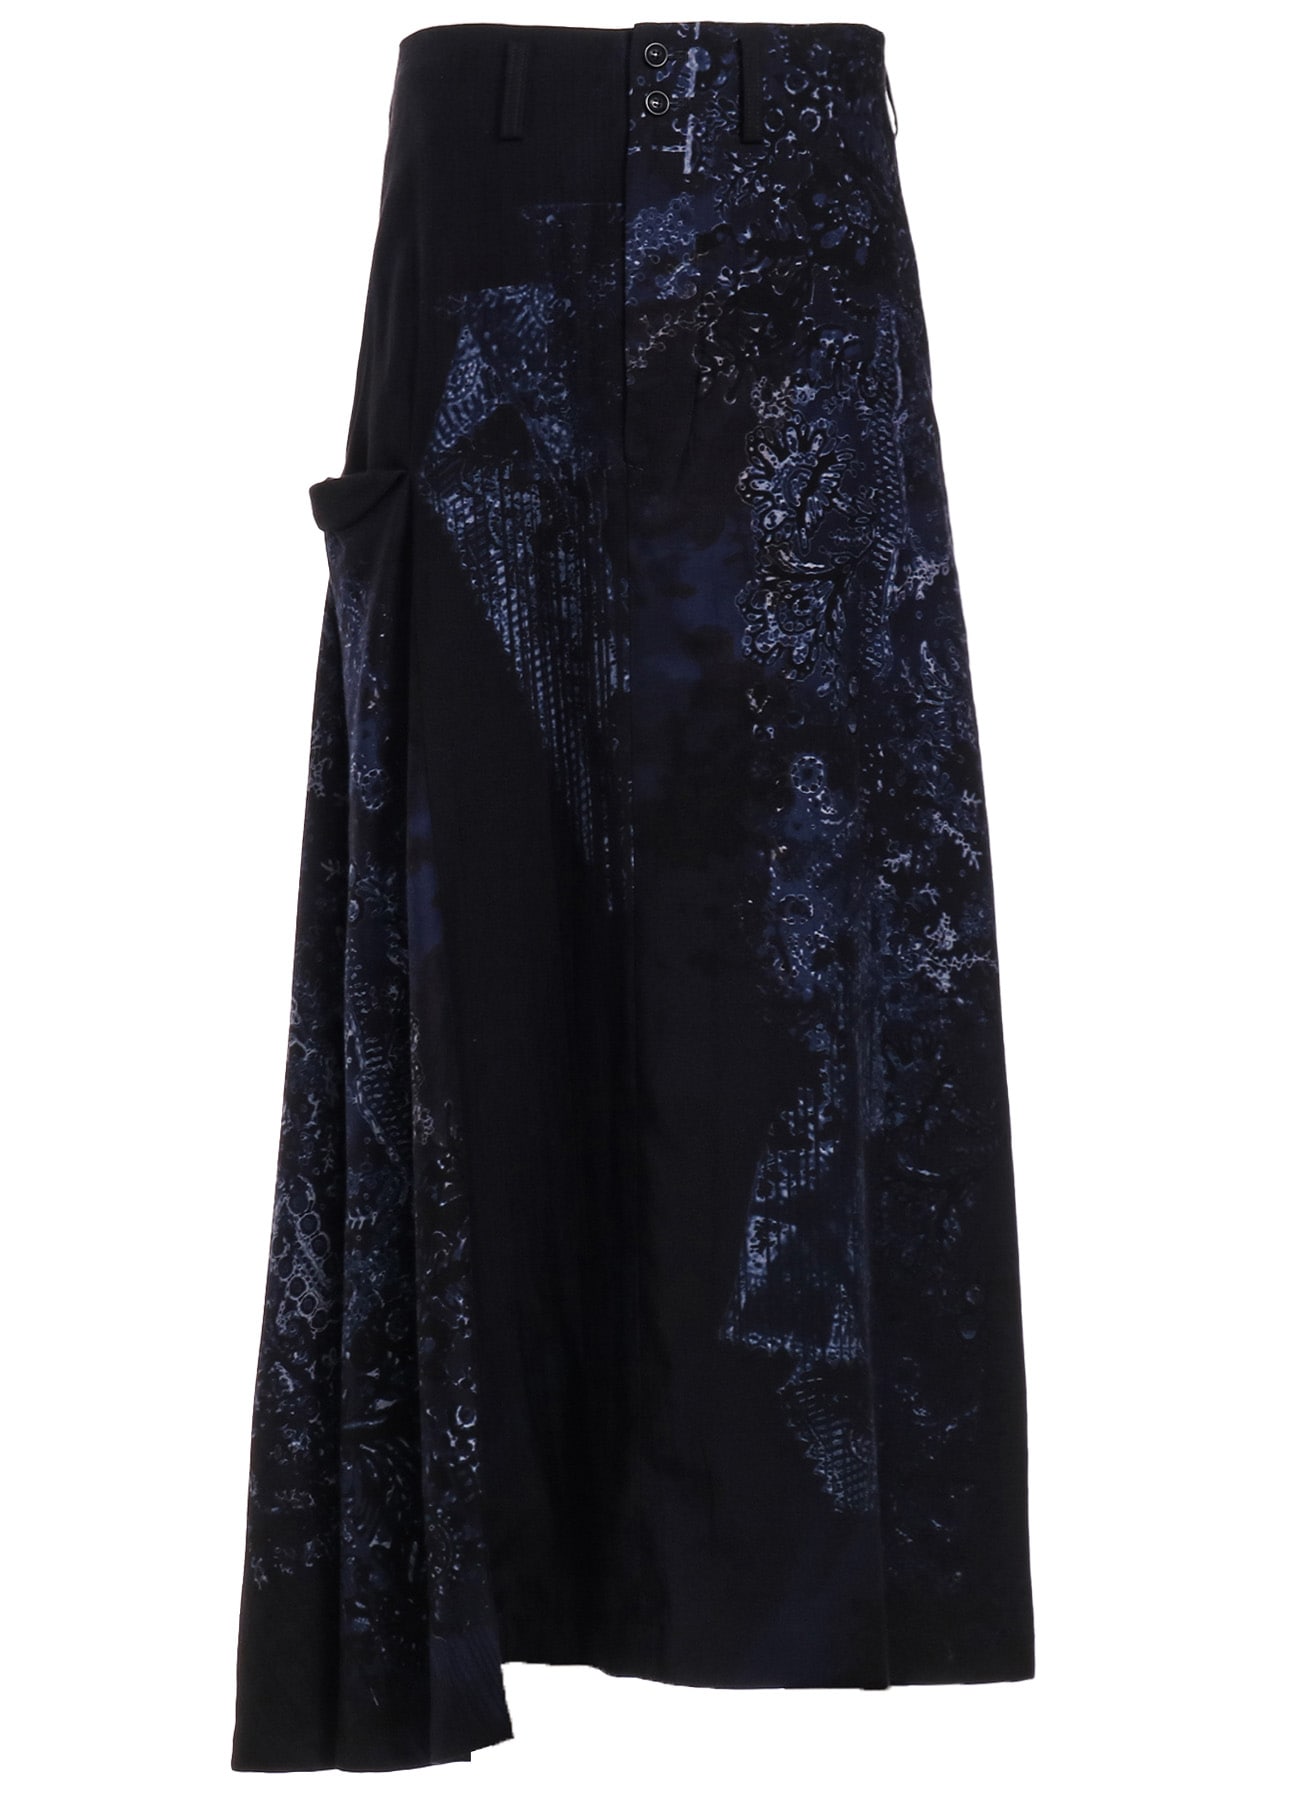 【8/2 12:00(JST) Release】CU/ TWILL LACE DESIGN PT RIGHT FLARE SKIRT